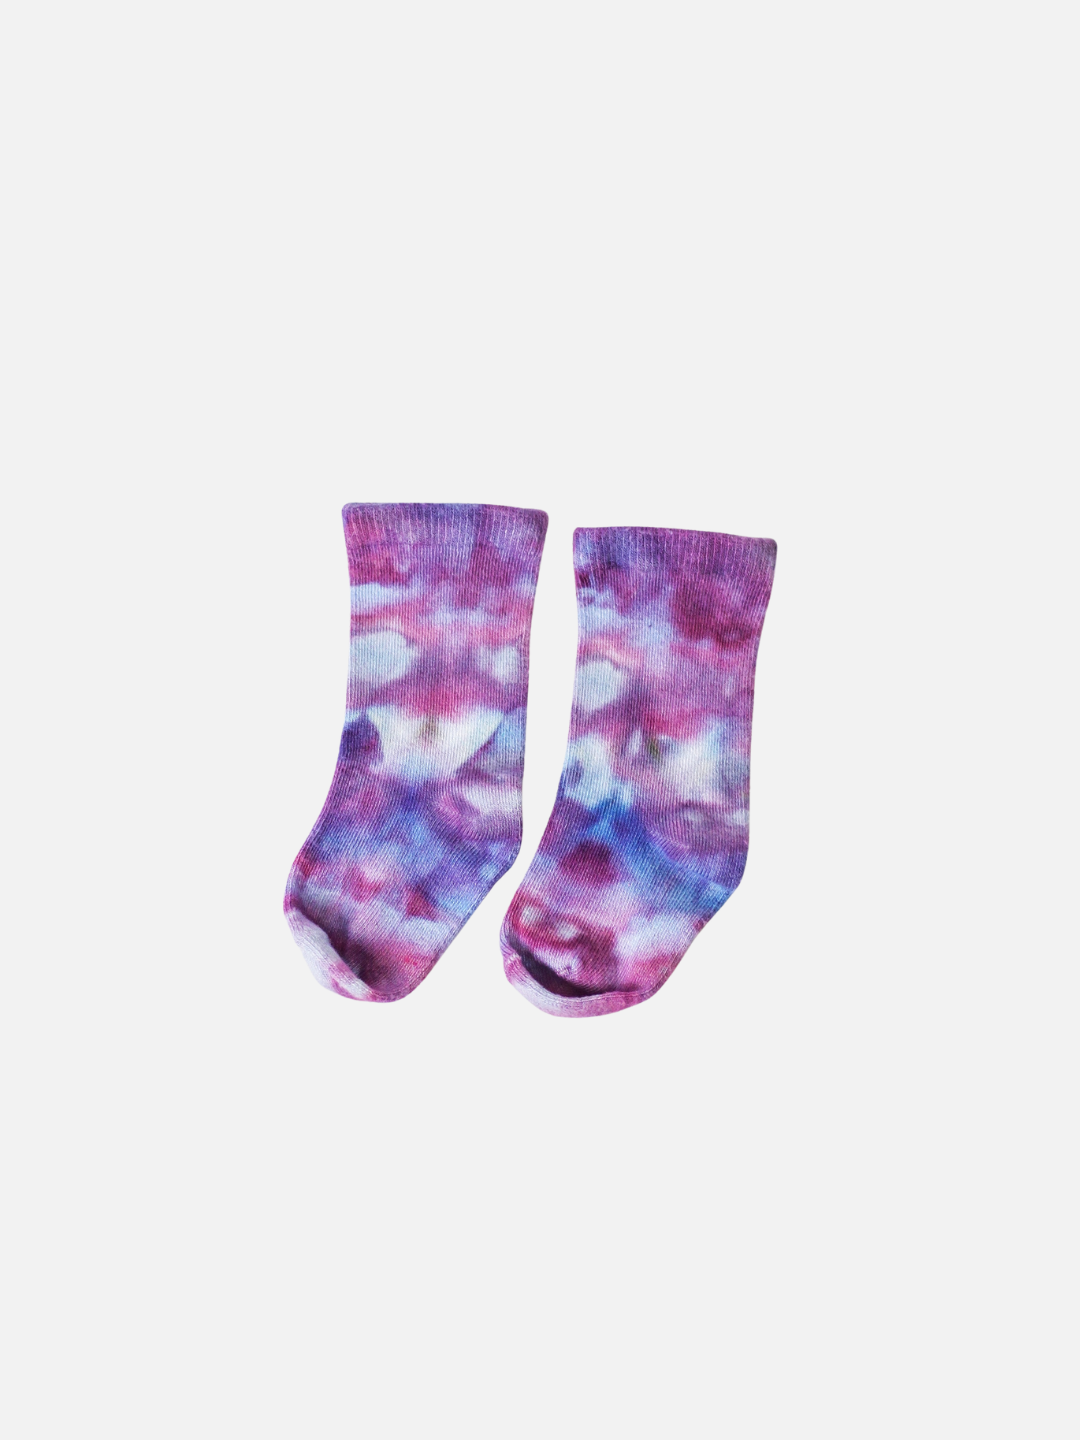 Pair of baby ankle socks in dappled shades of violet, pink and blue